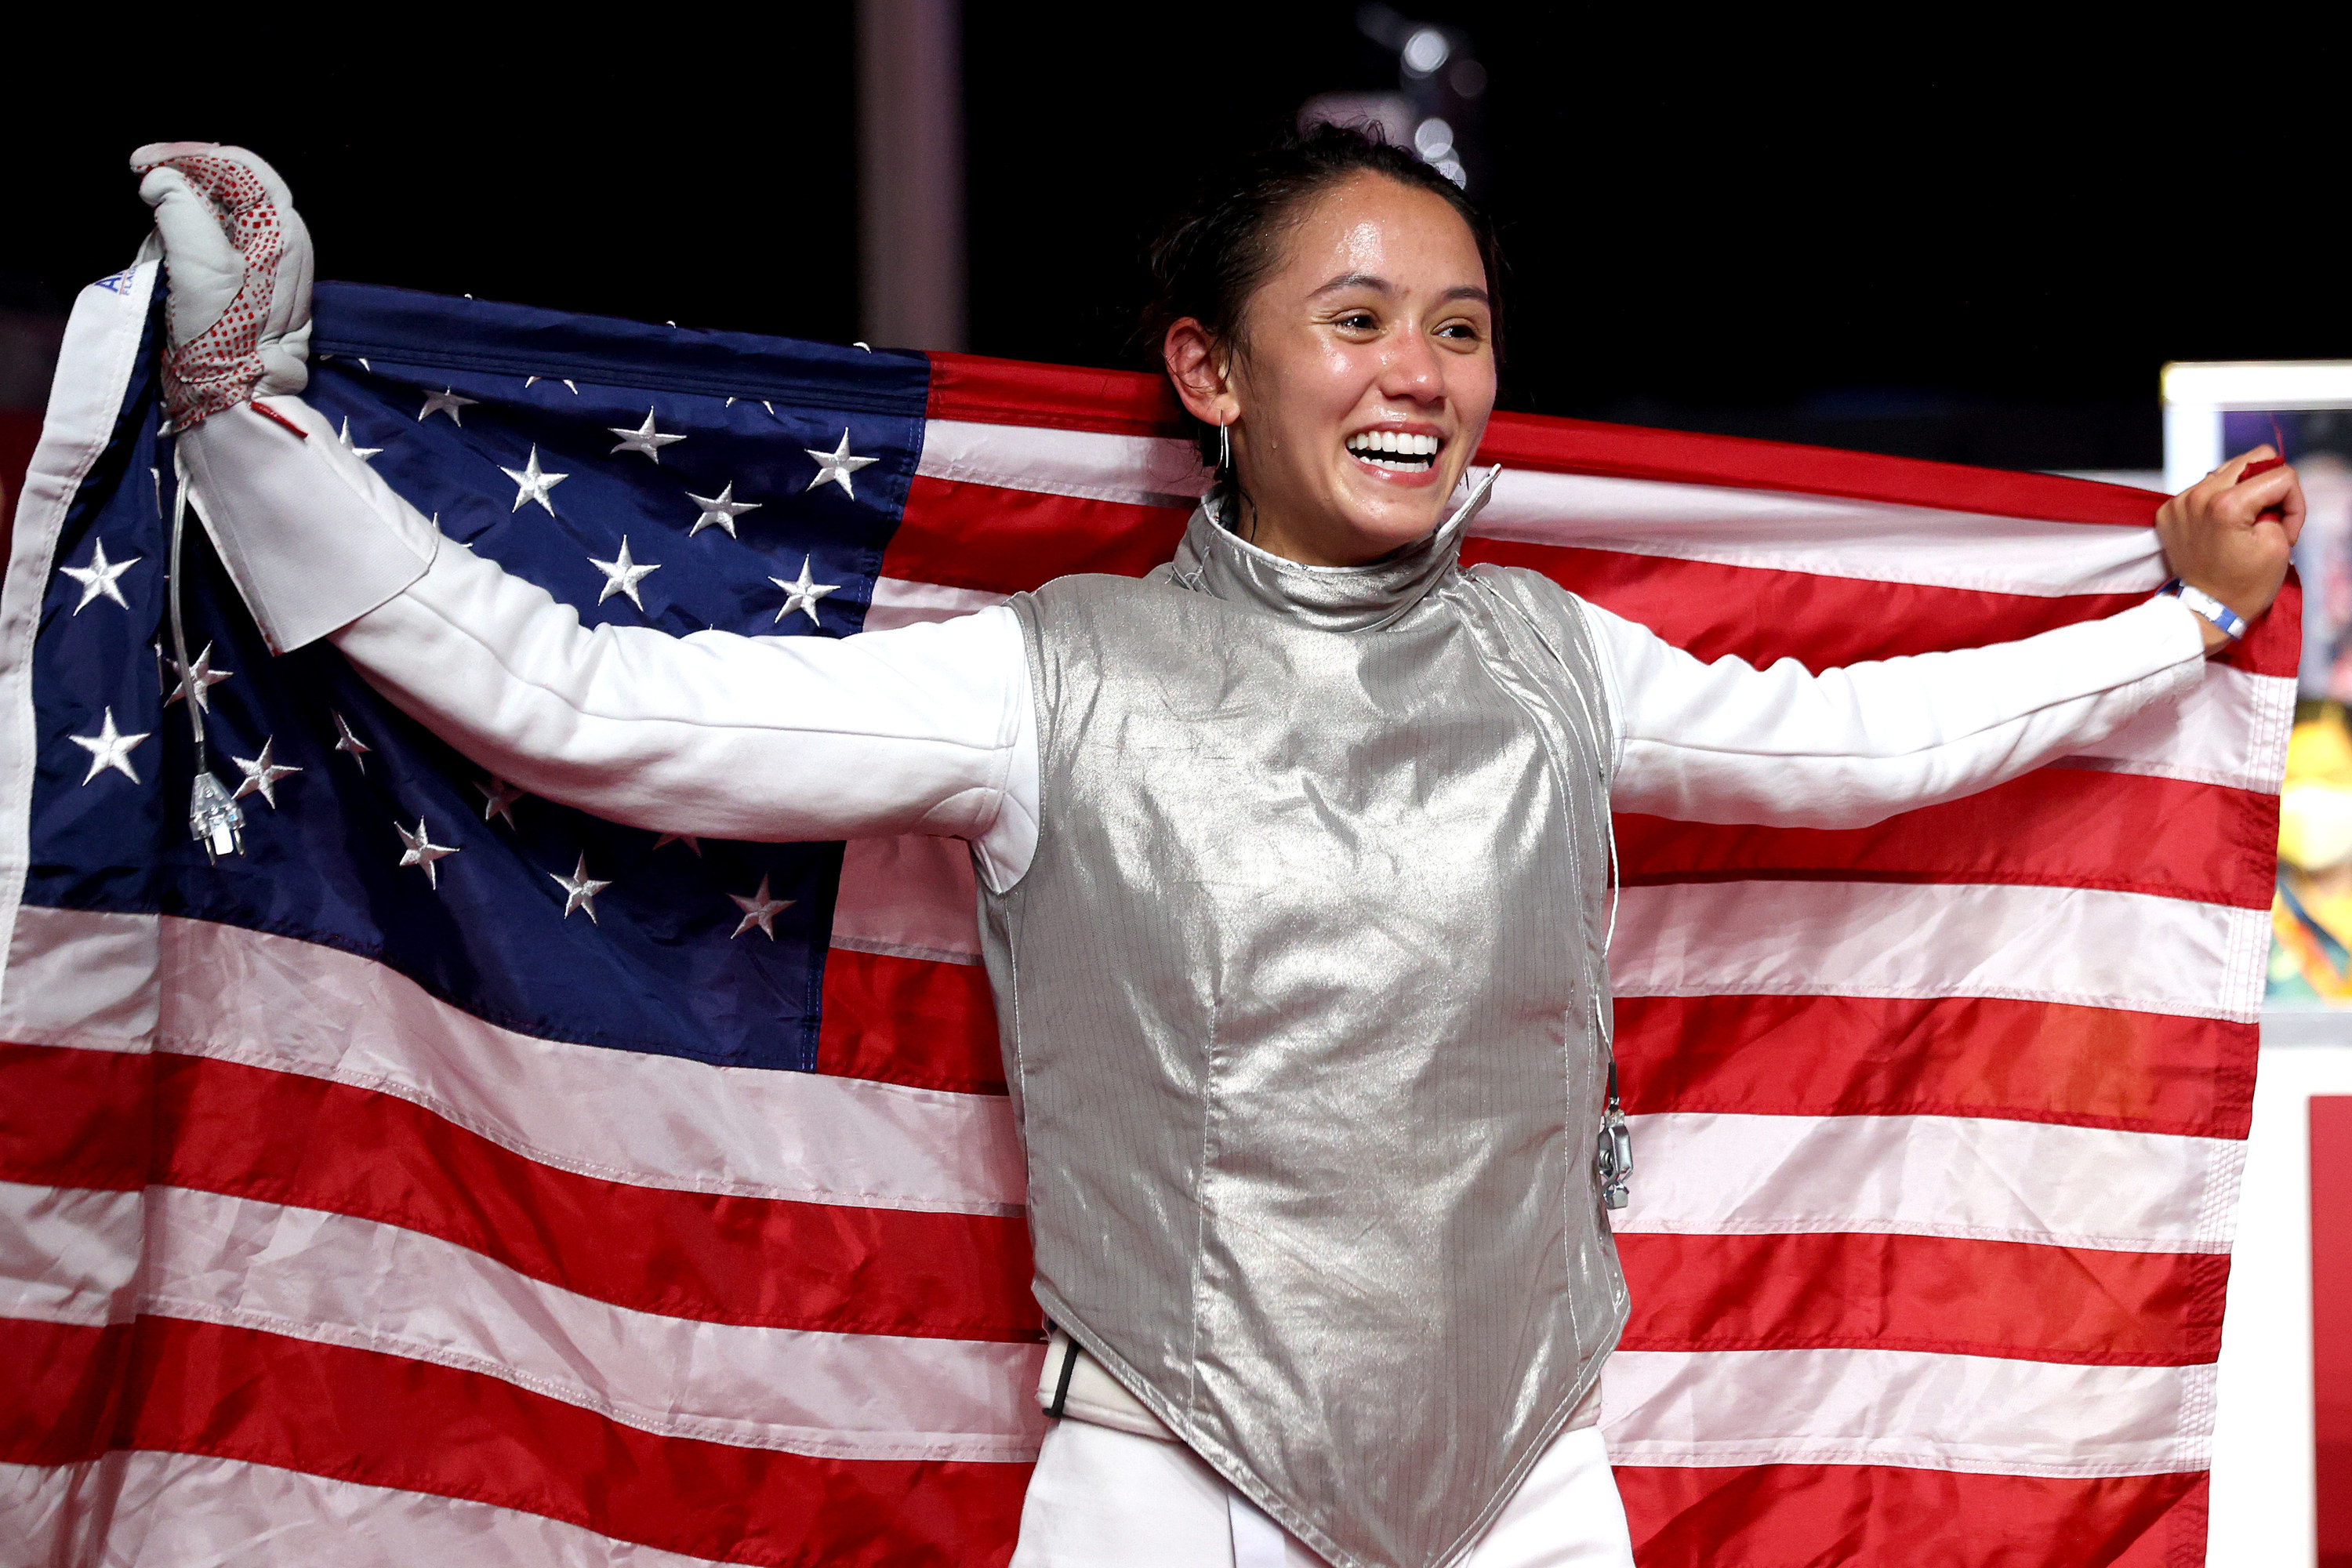 Lee holds up a U.S. flag as she poses for the cameras after her win